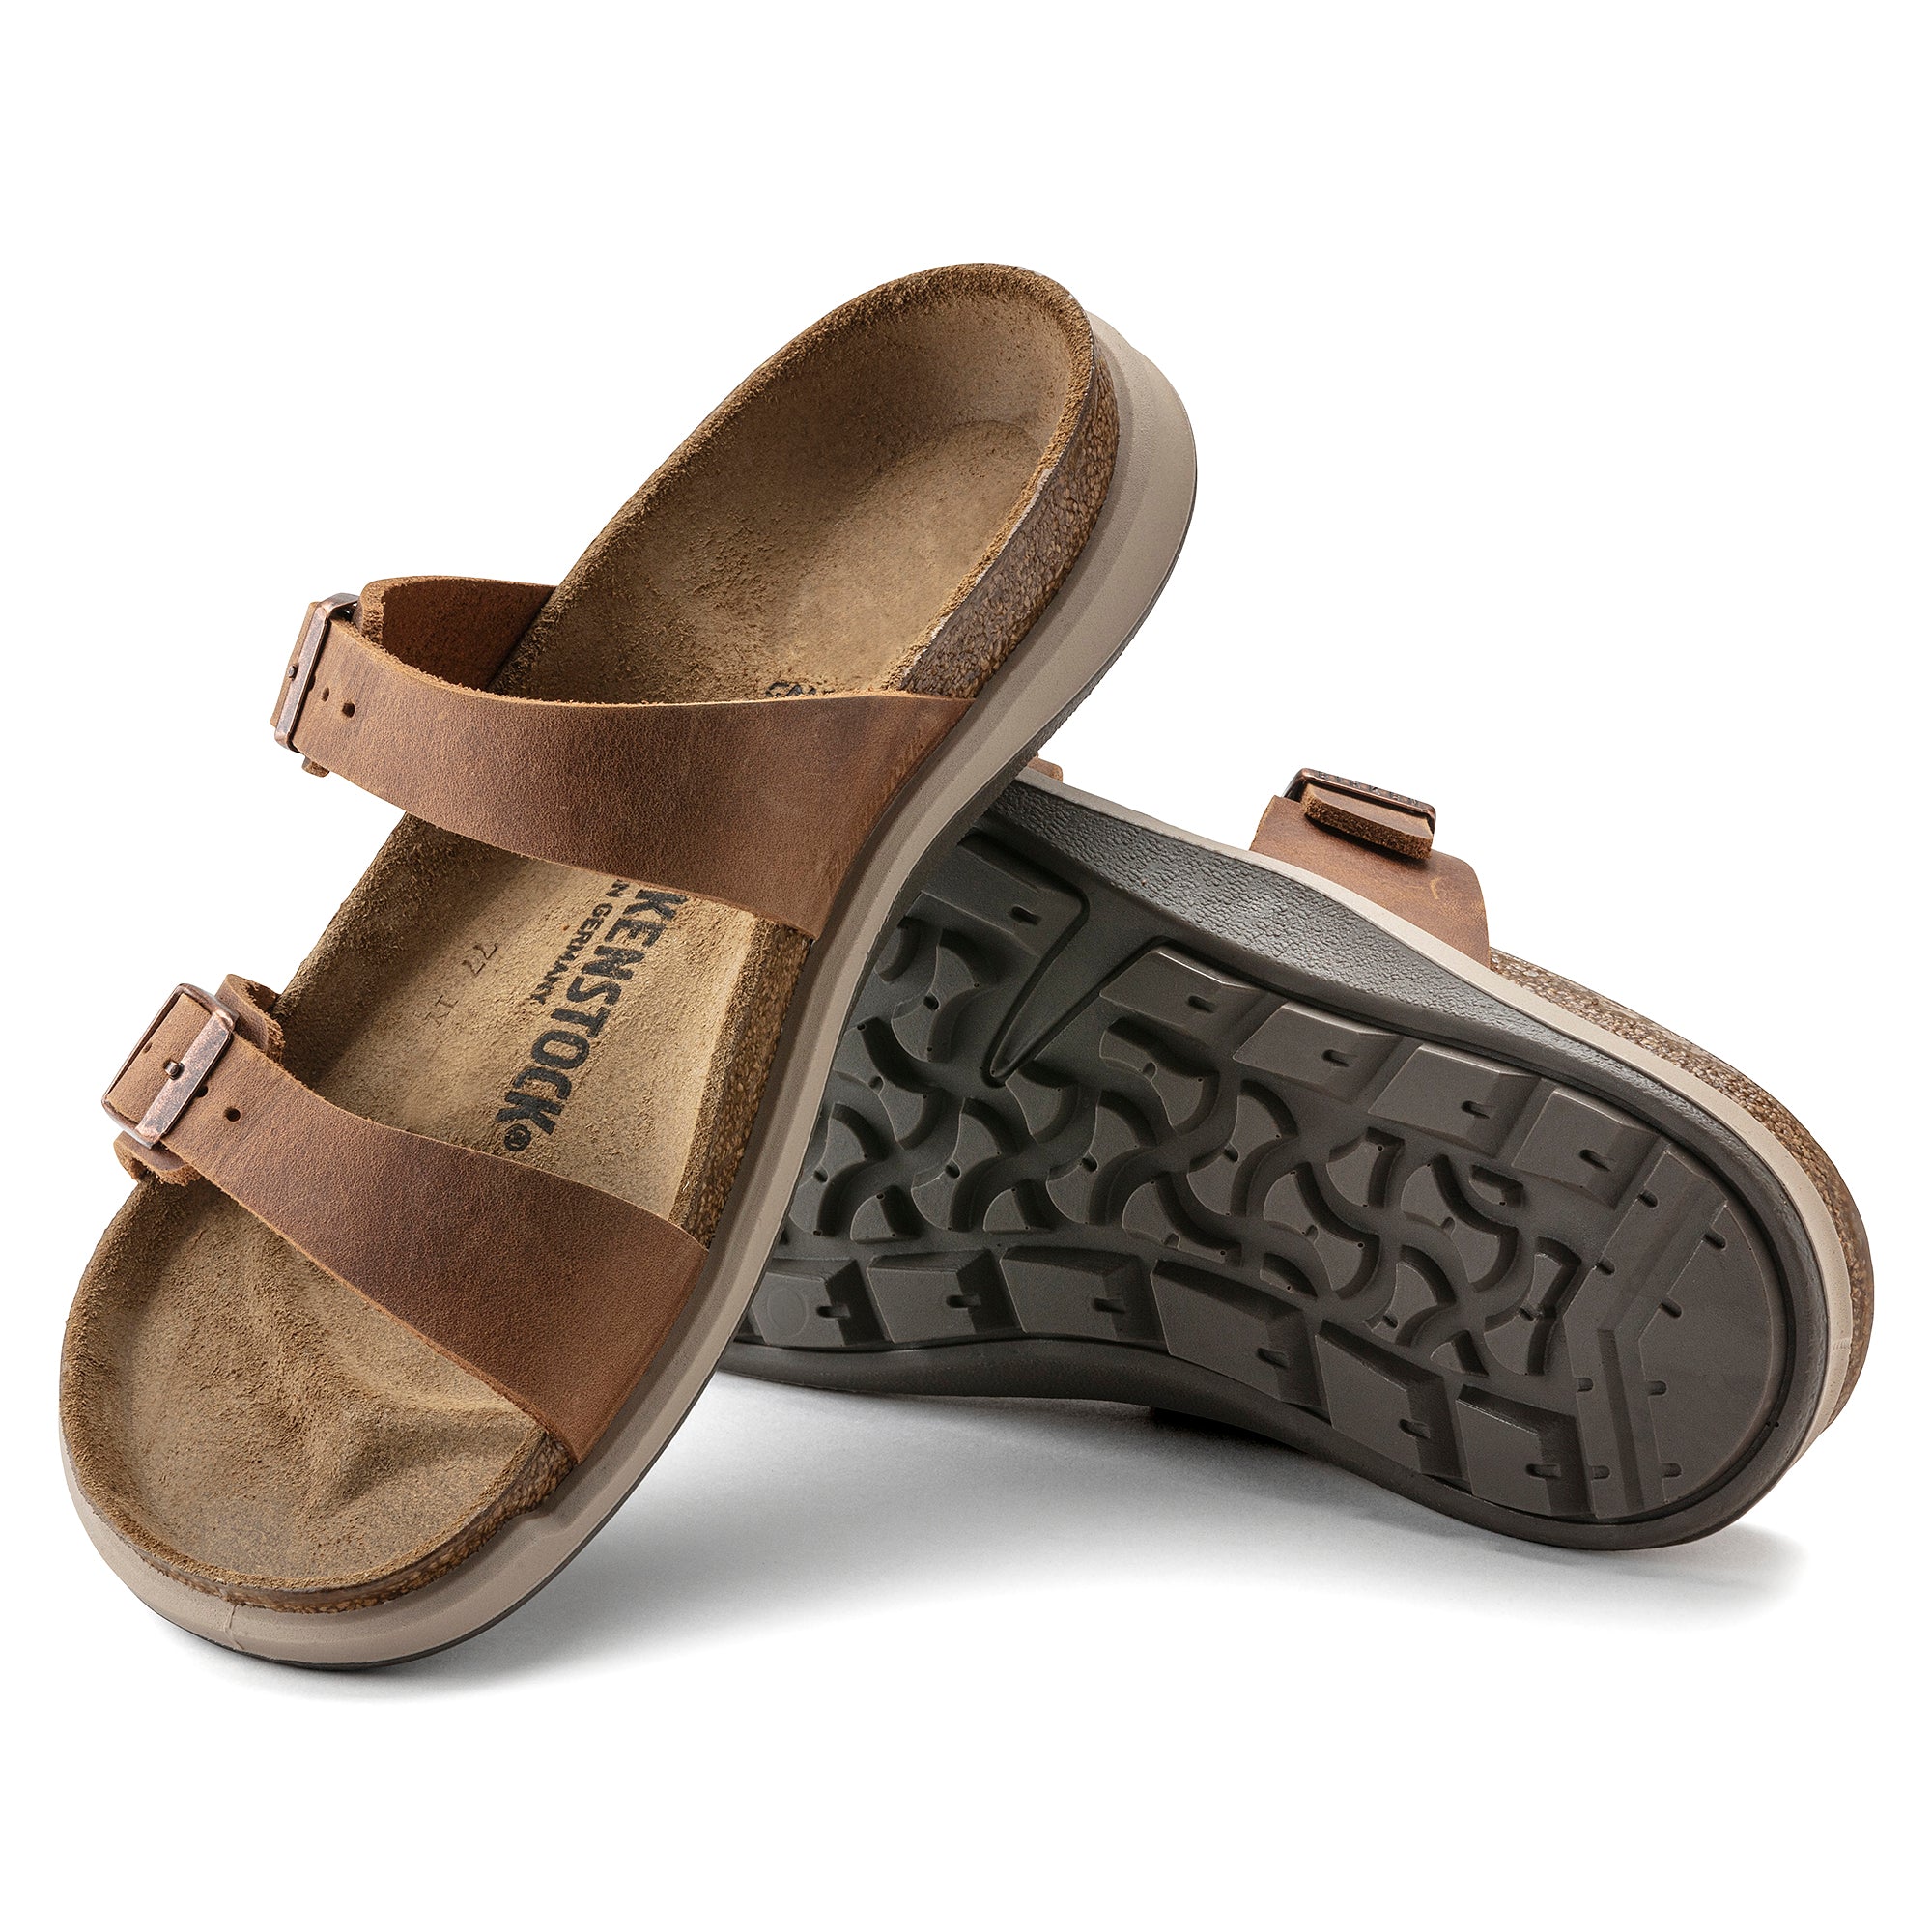 Birkenstock Sandals Are Going for as Little as $44 at Gilt